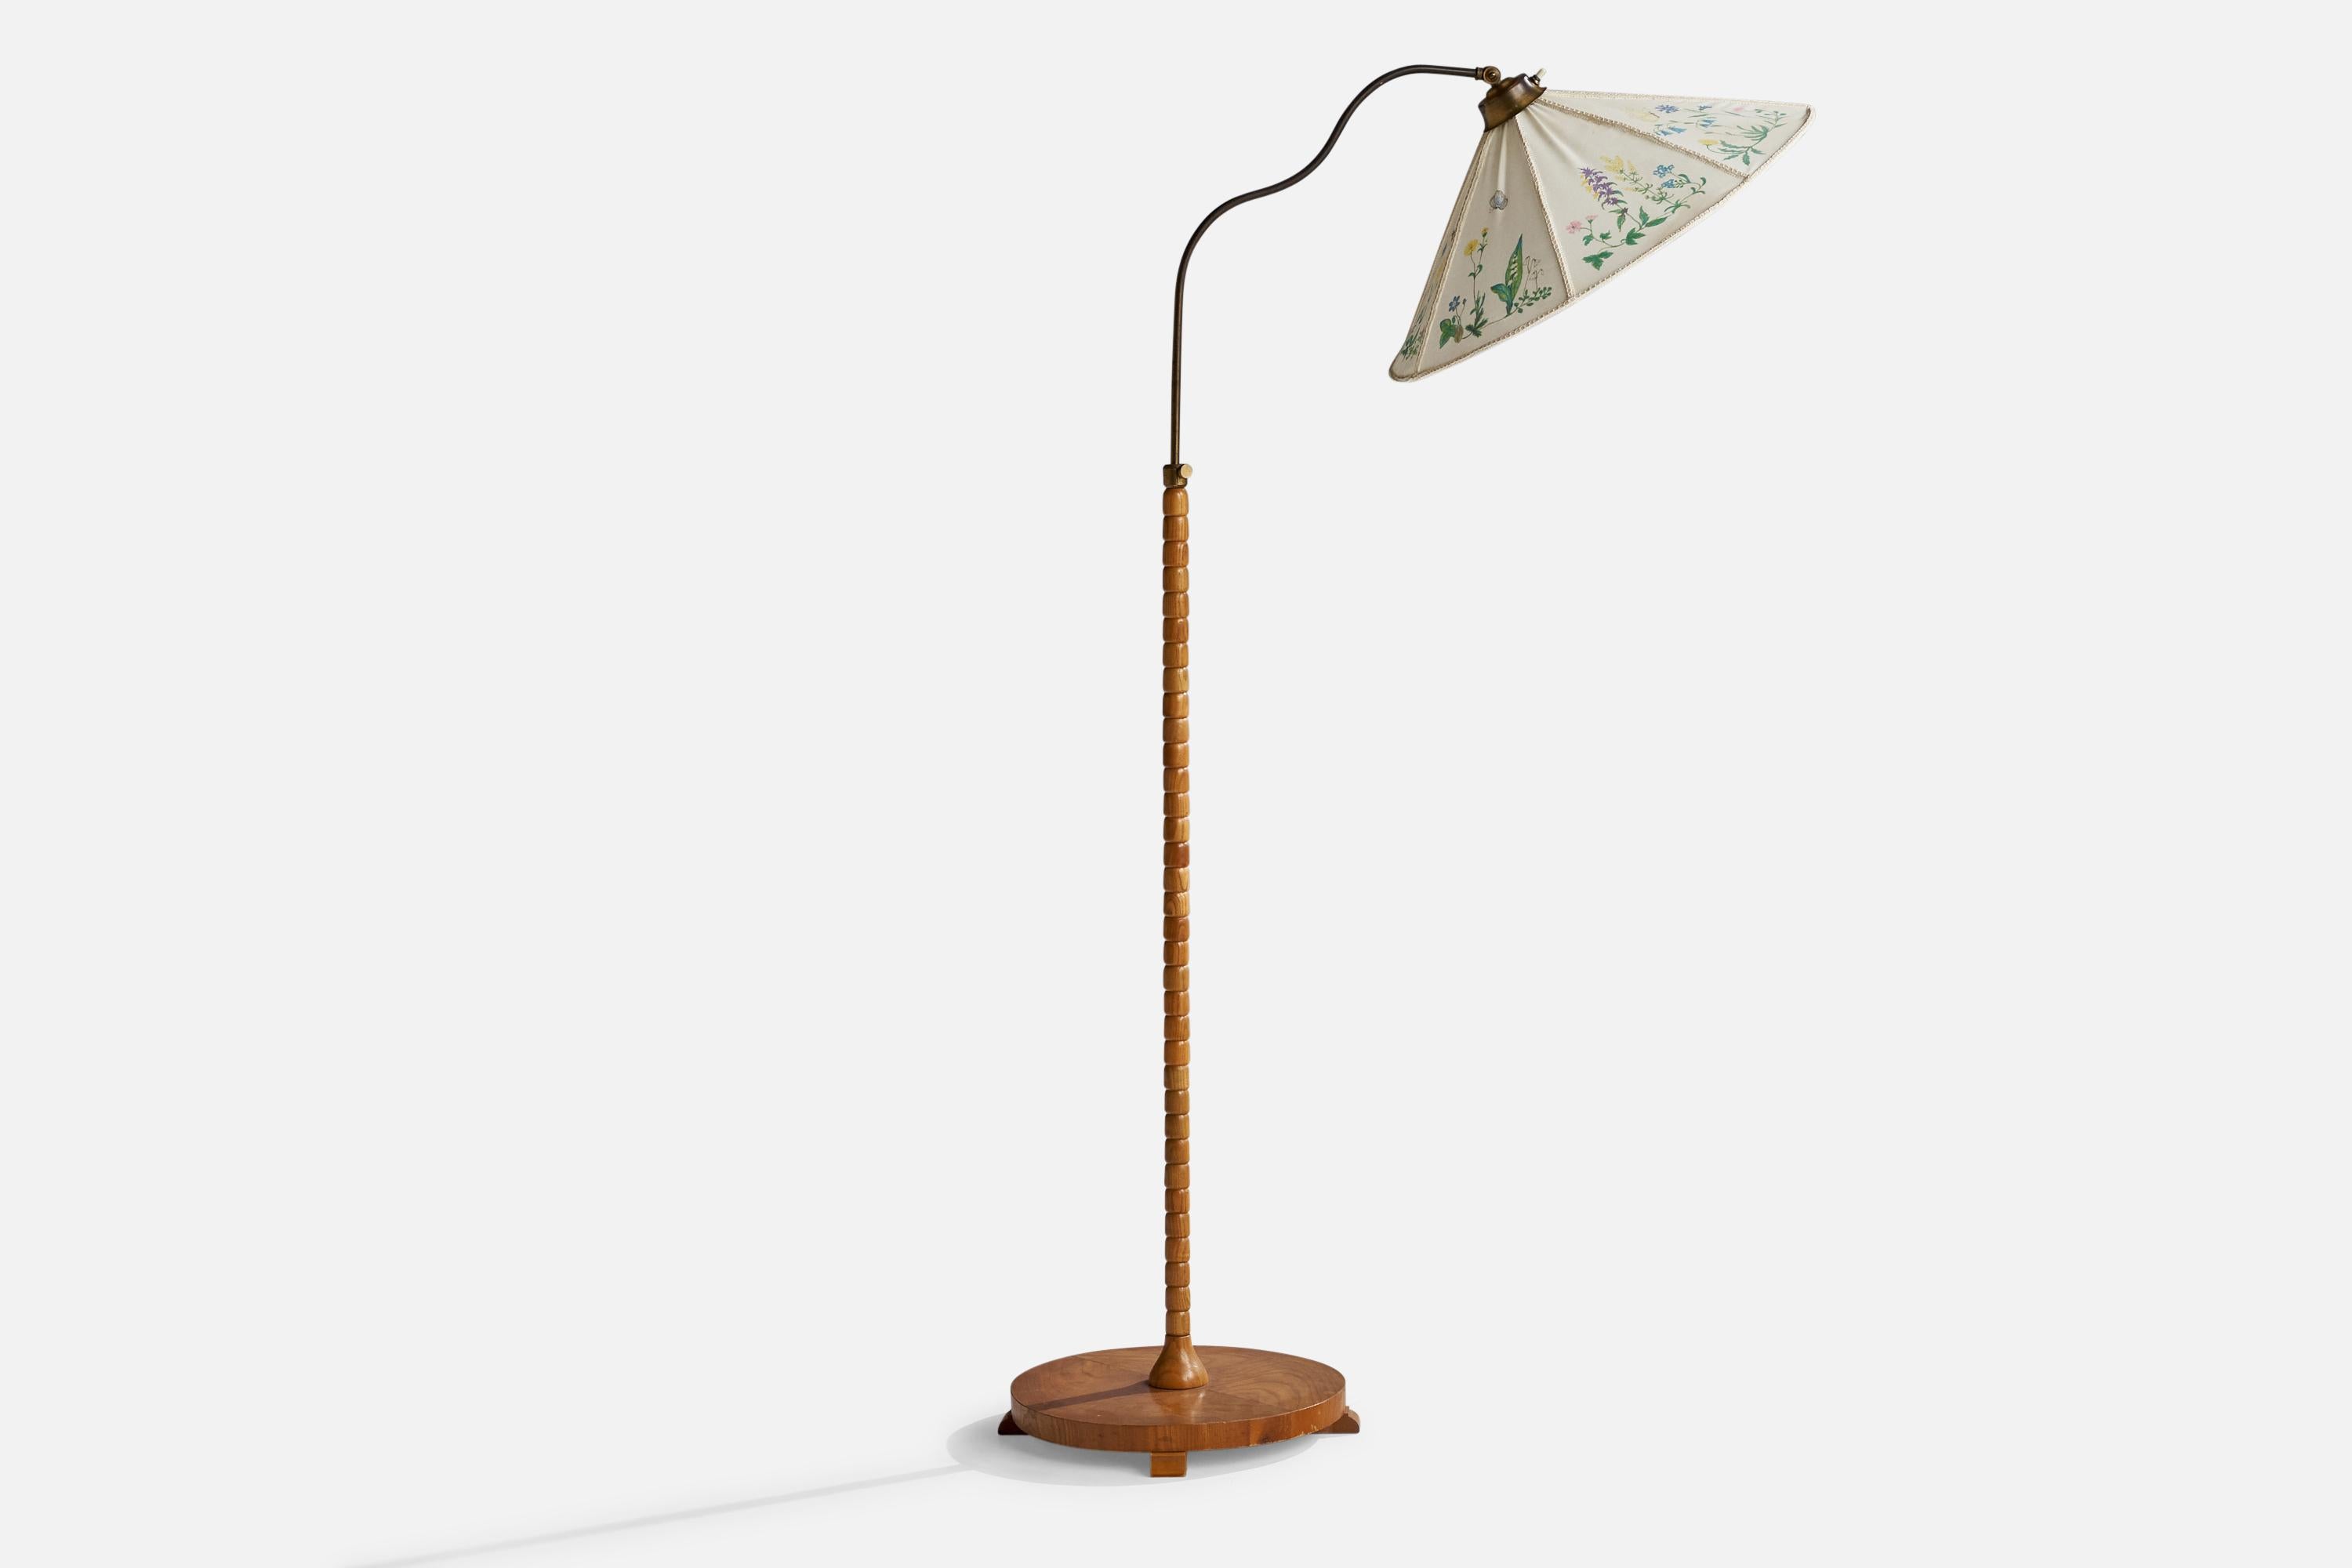 A brass, elm and floral printed fabric floor lamp designed and produced in Sweden, 1940s.

Dimensions variable.

Overall Dimensions (inches): 57”  H x 20”  W x 35” D
Stated dimensions include shade.
Bulb Specifications: E-26 Bulb
Number of Sockets: